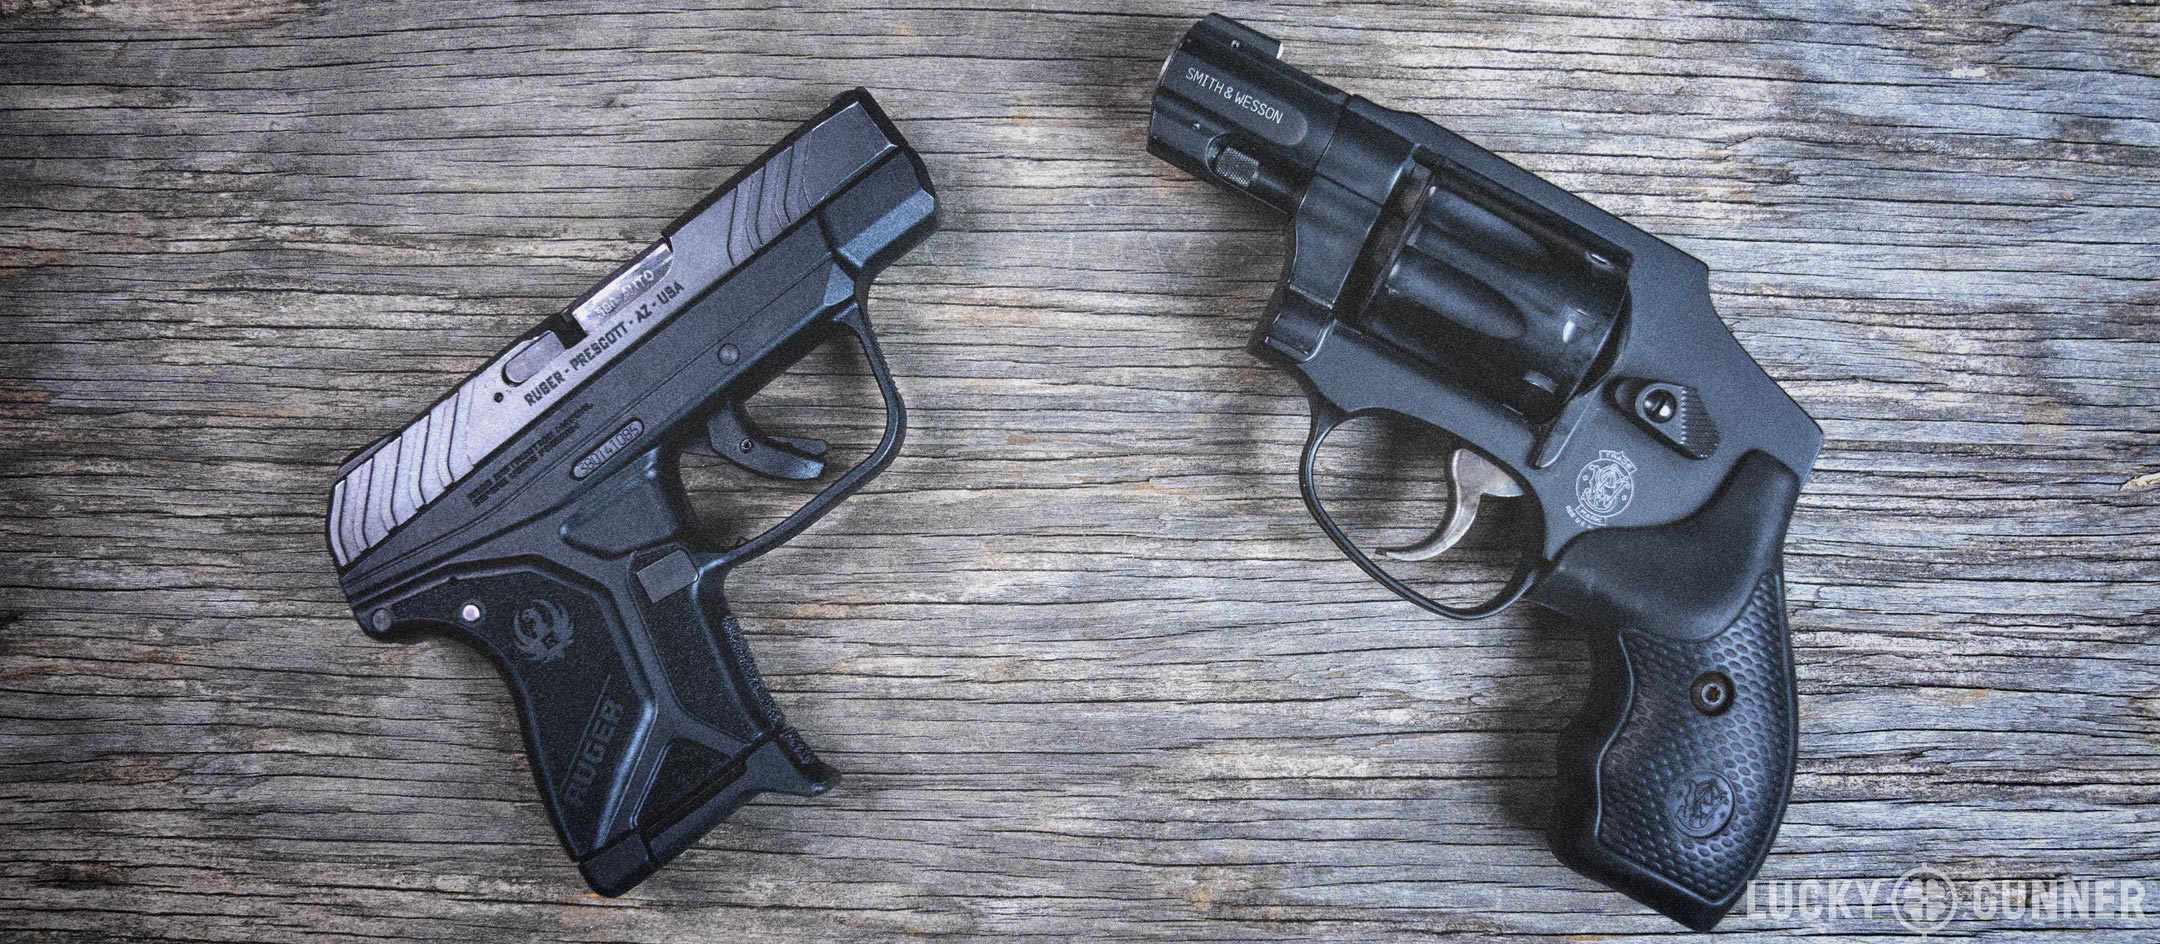 Here are reviews of the smith wesson model 360 ruger lcr and kimber k6s. 